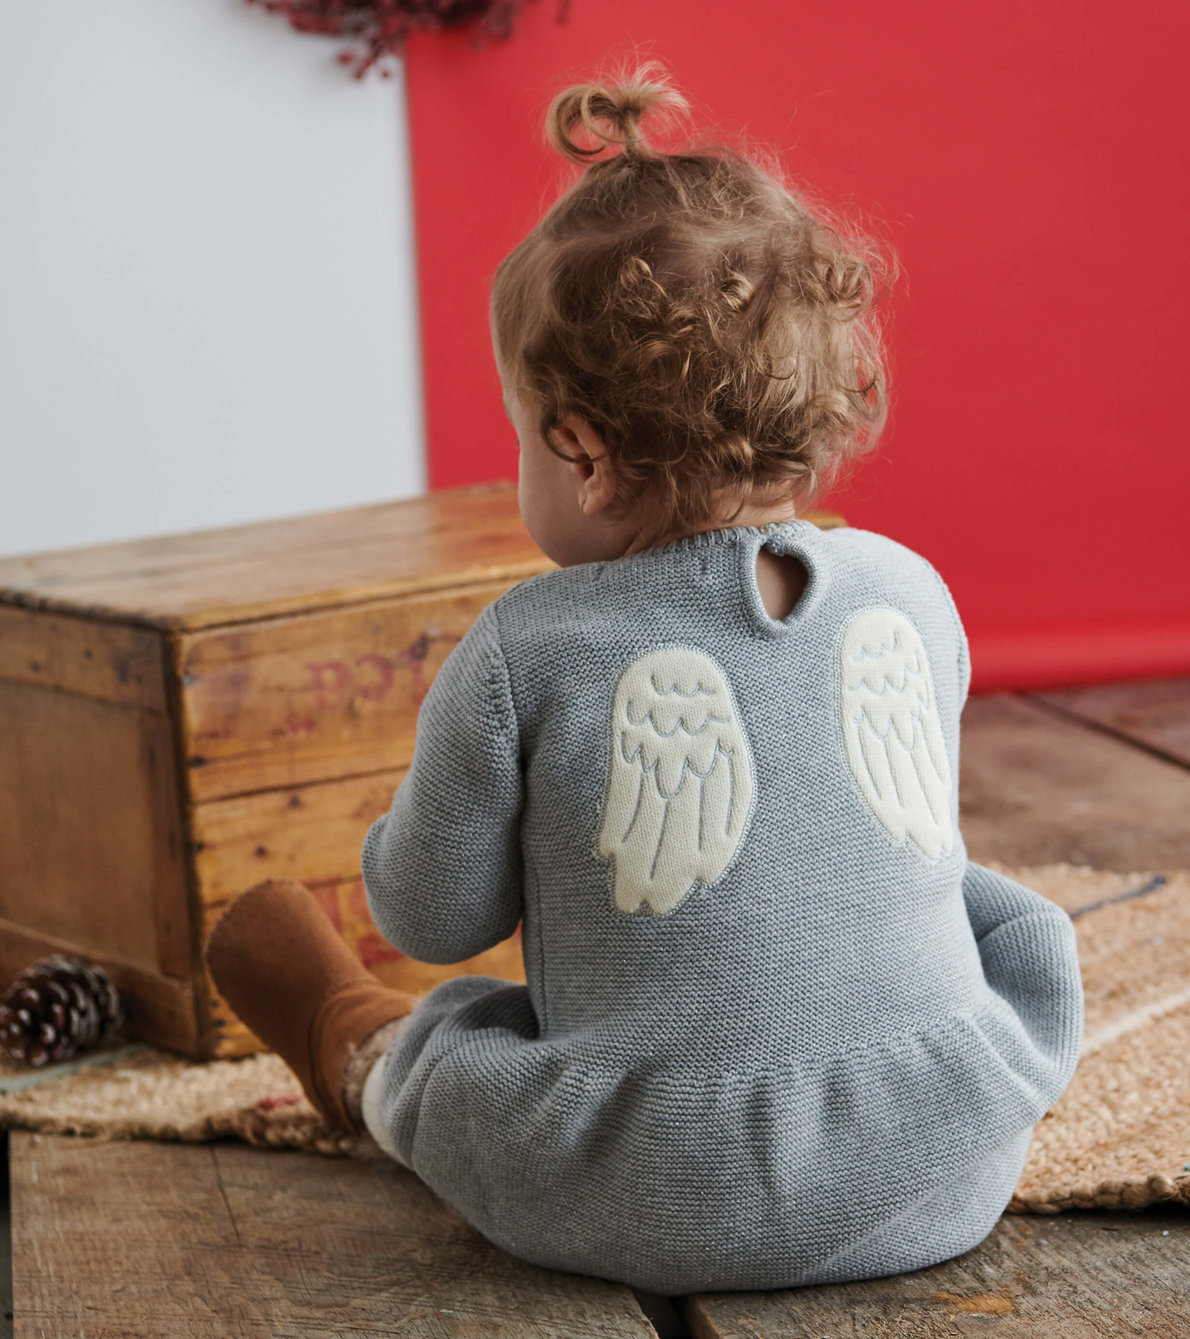 View larger image of Little Angel Baby Sweater Dress